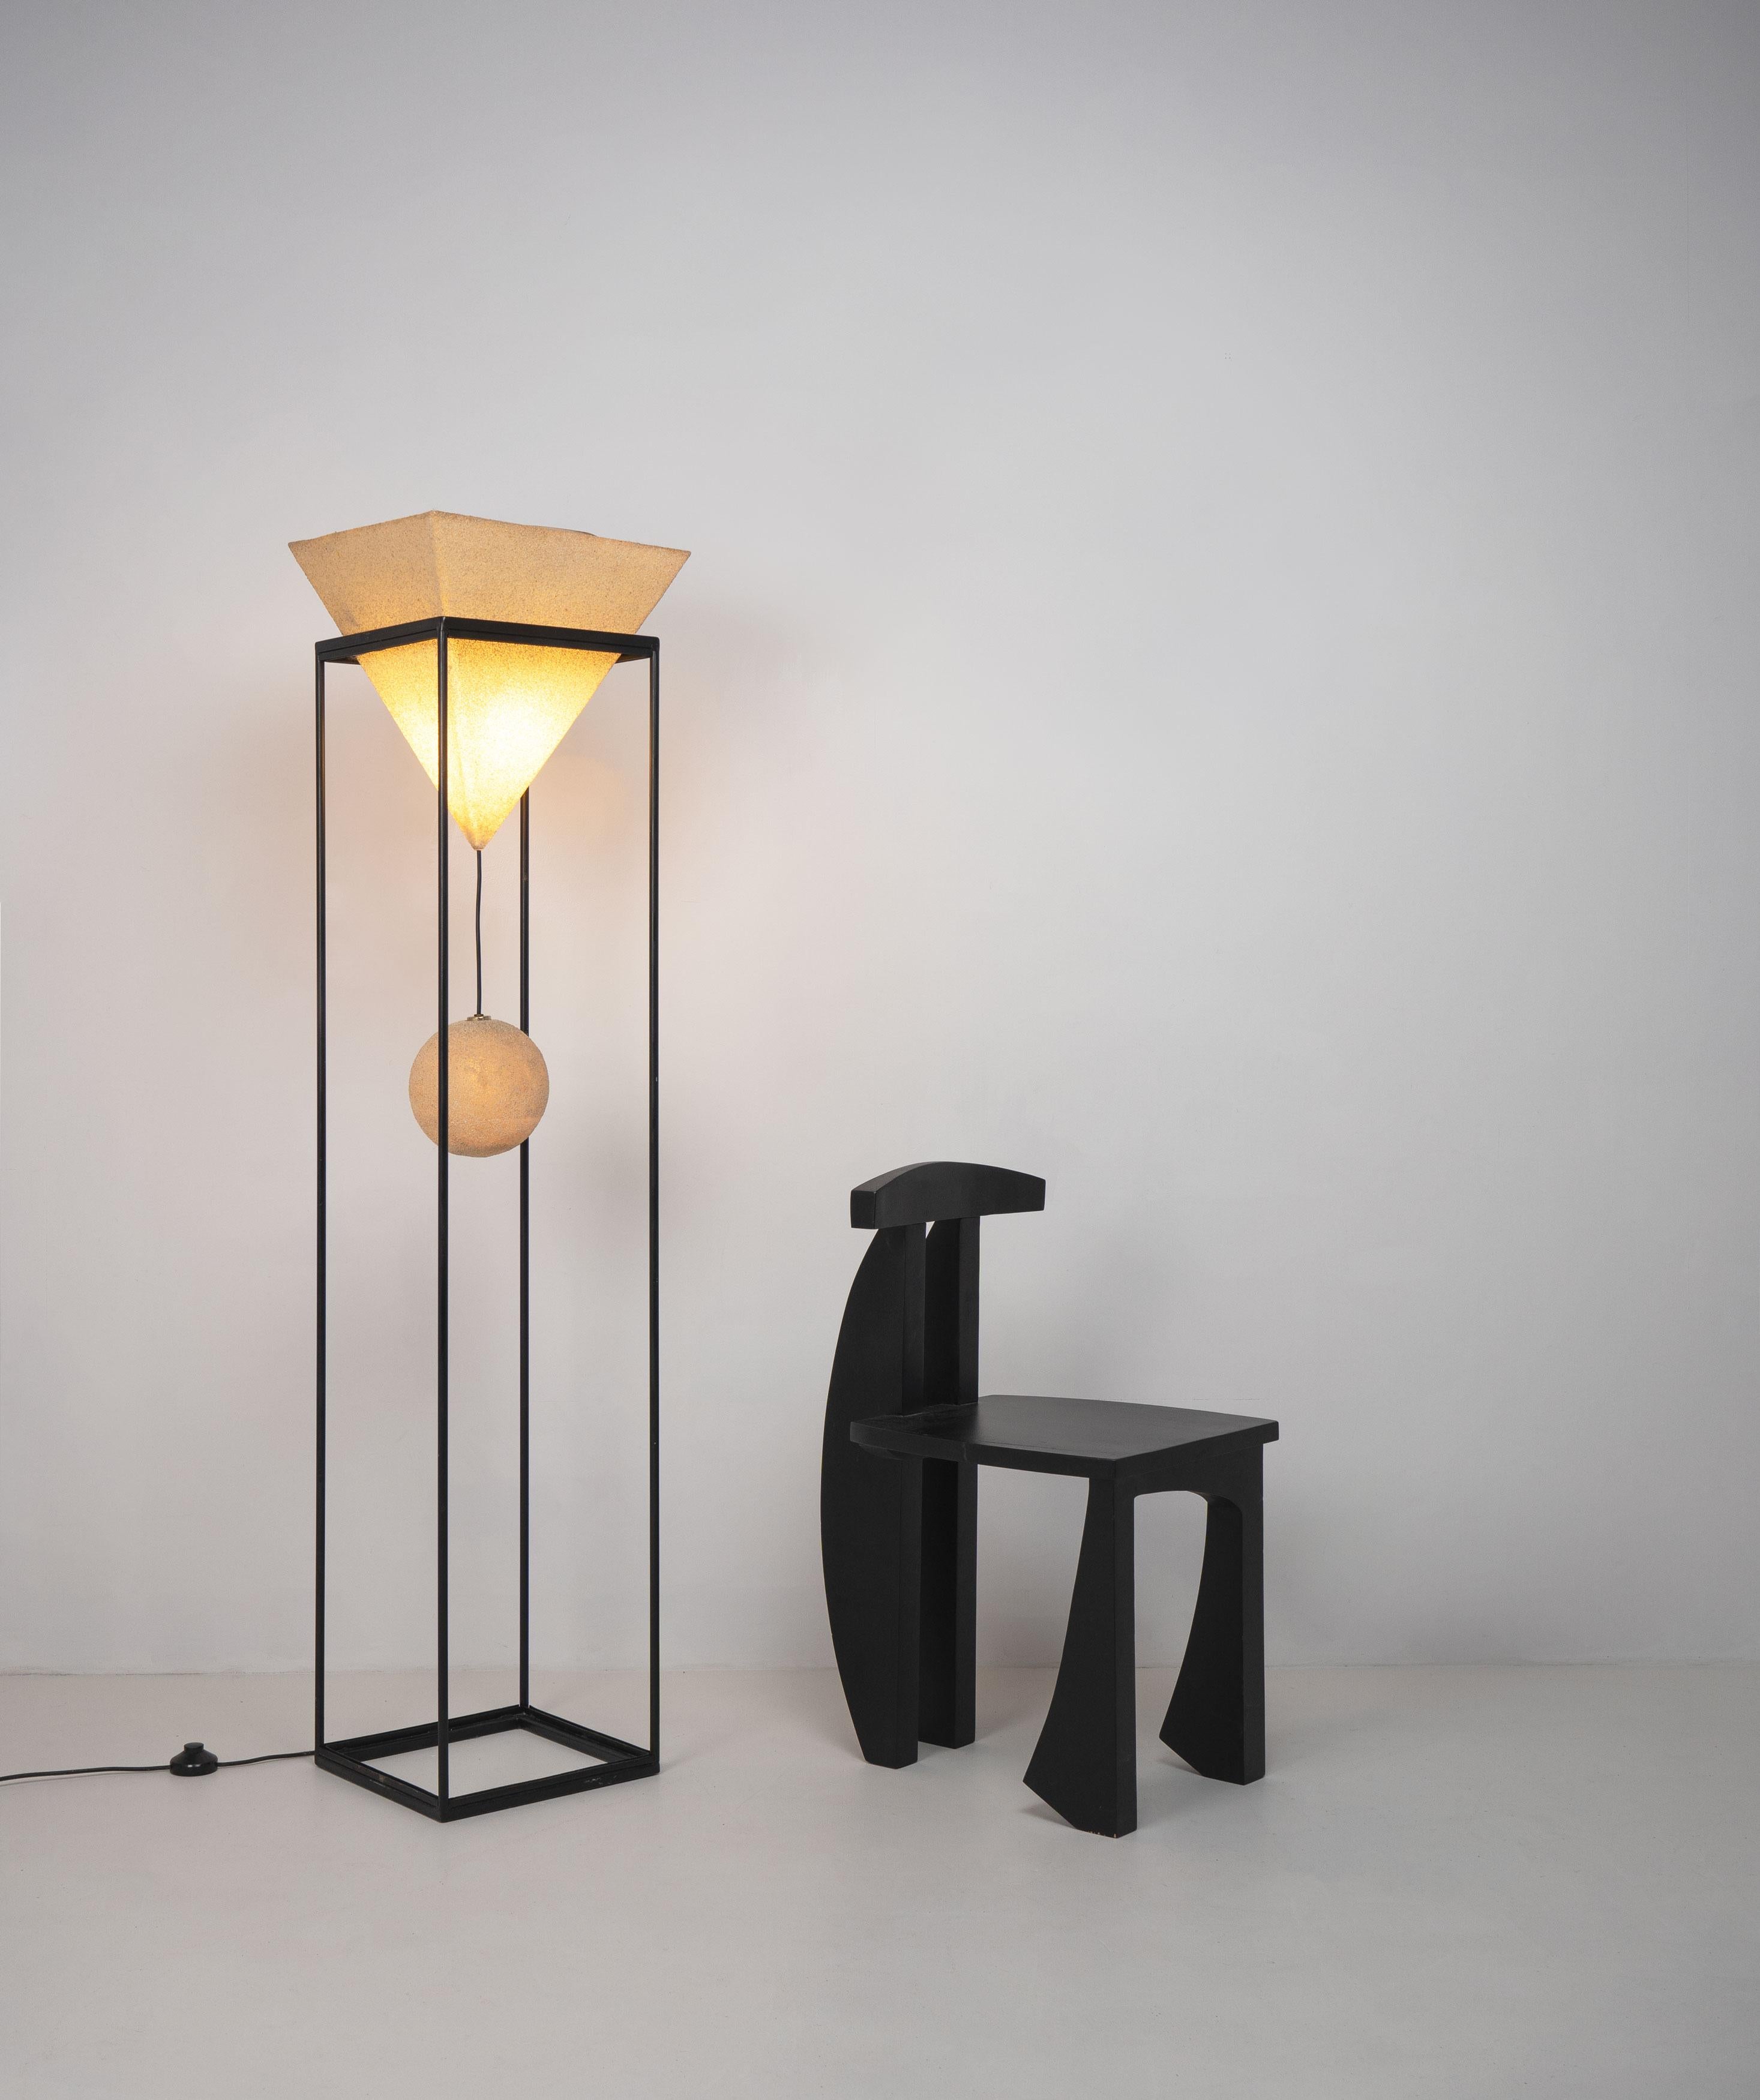 A Postmodern floor lamp designed by Luciano Sartini and manufactured by Singleton, Italy, c.1970. Featuring an inverted pyramidal resin shade from which suspends an additional spherical resin light, supported by a metal cuboid frame. 

Dimensions